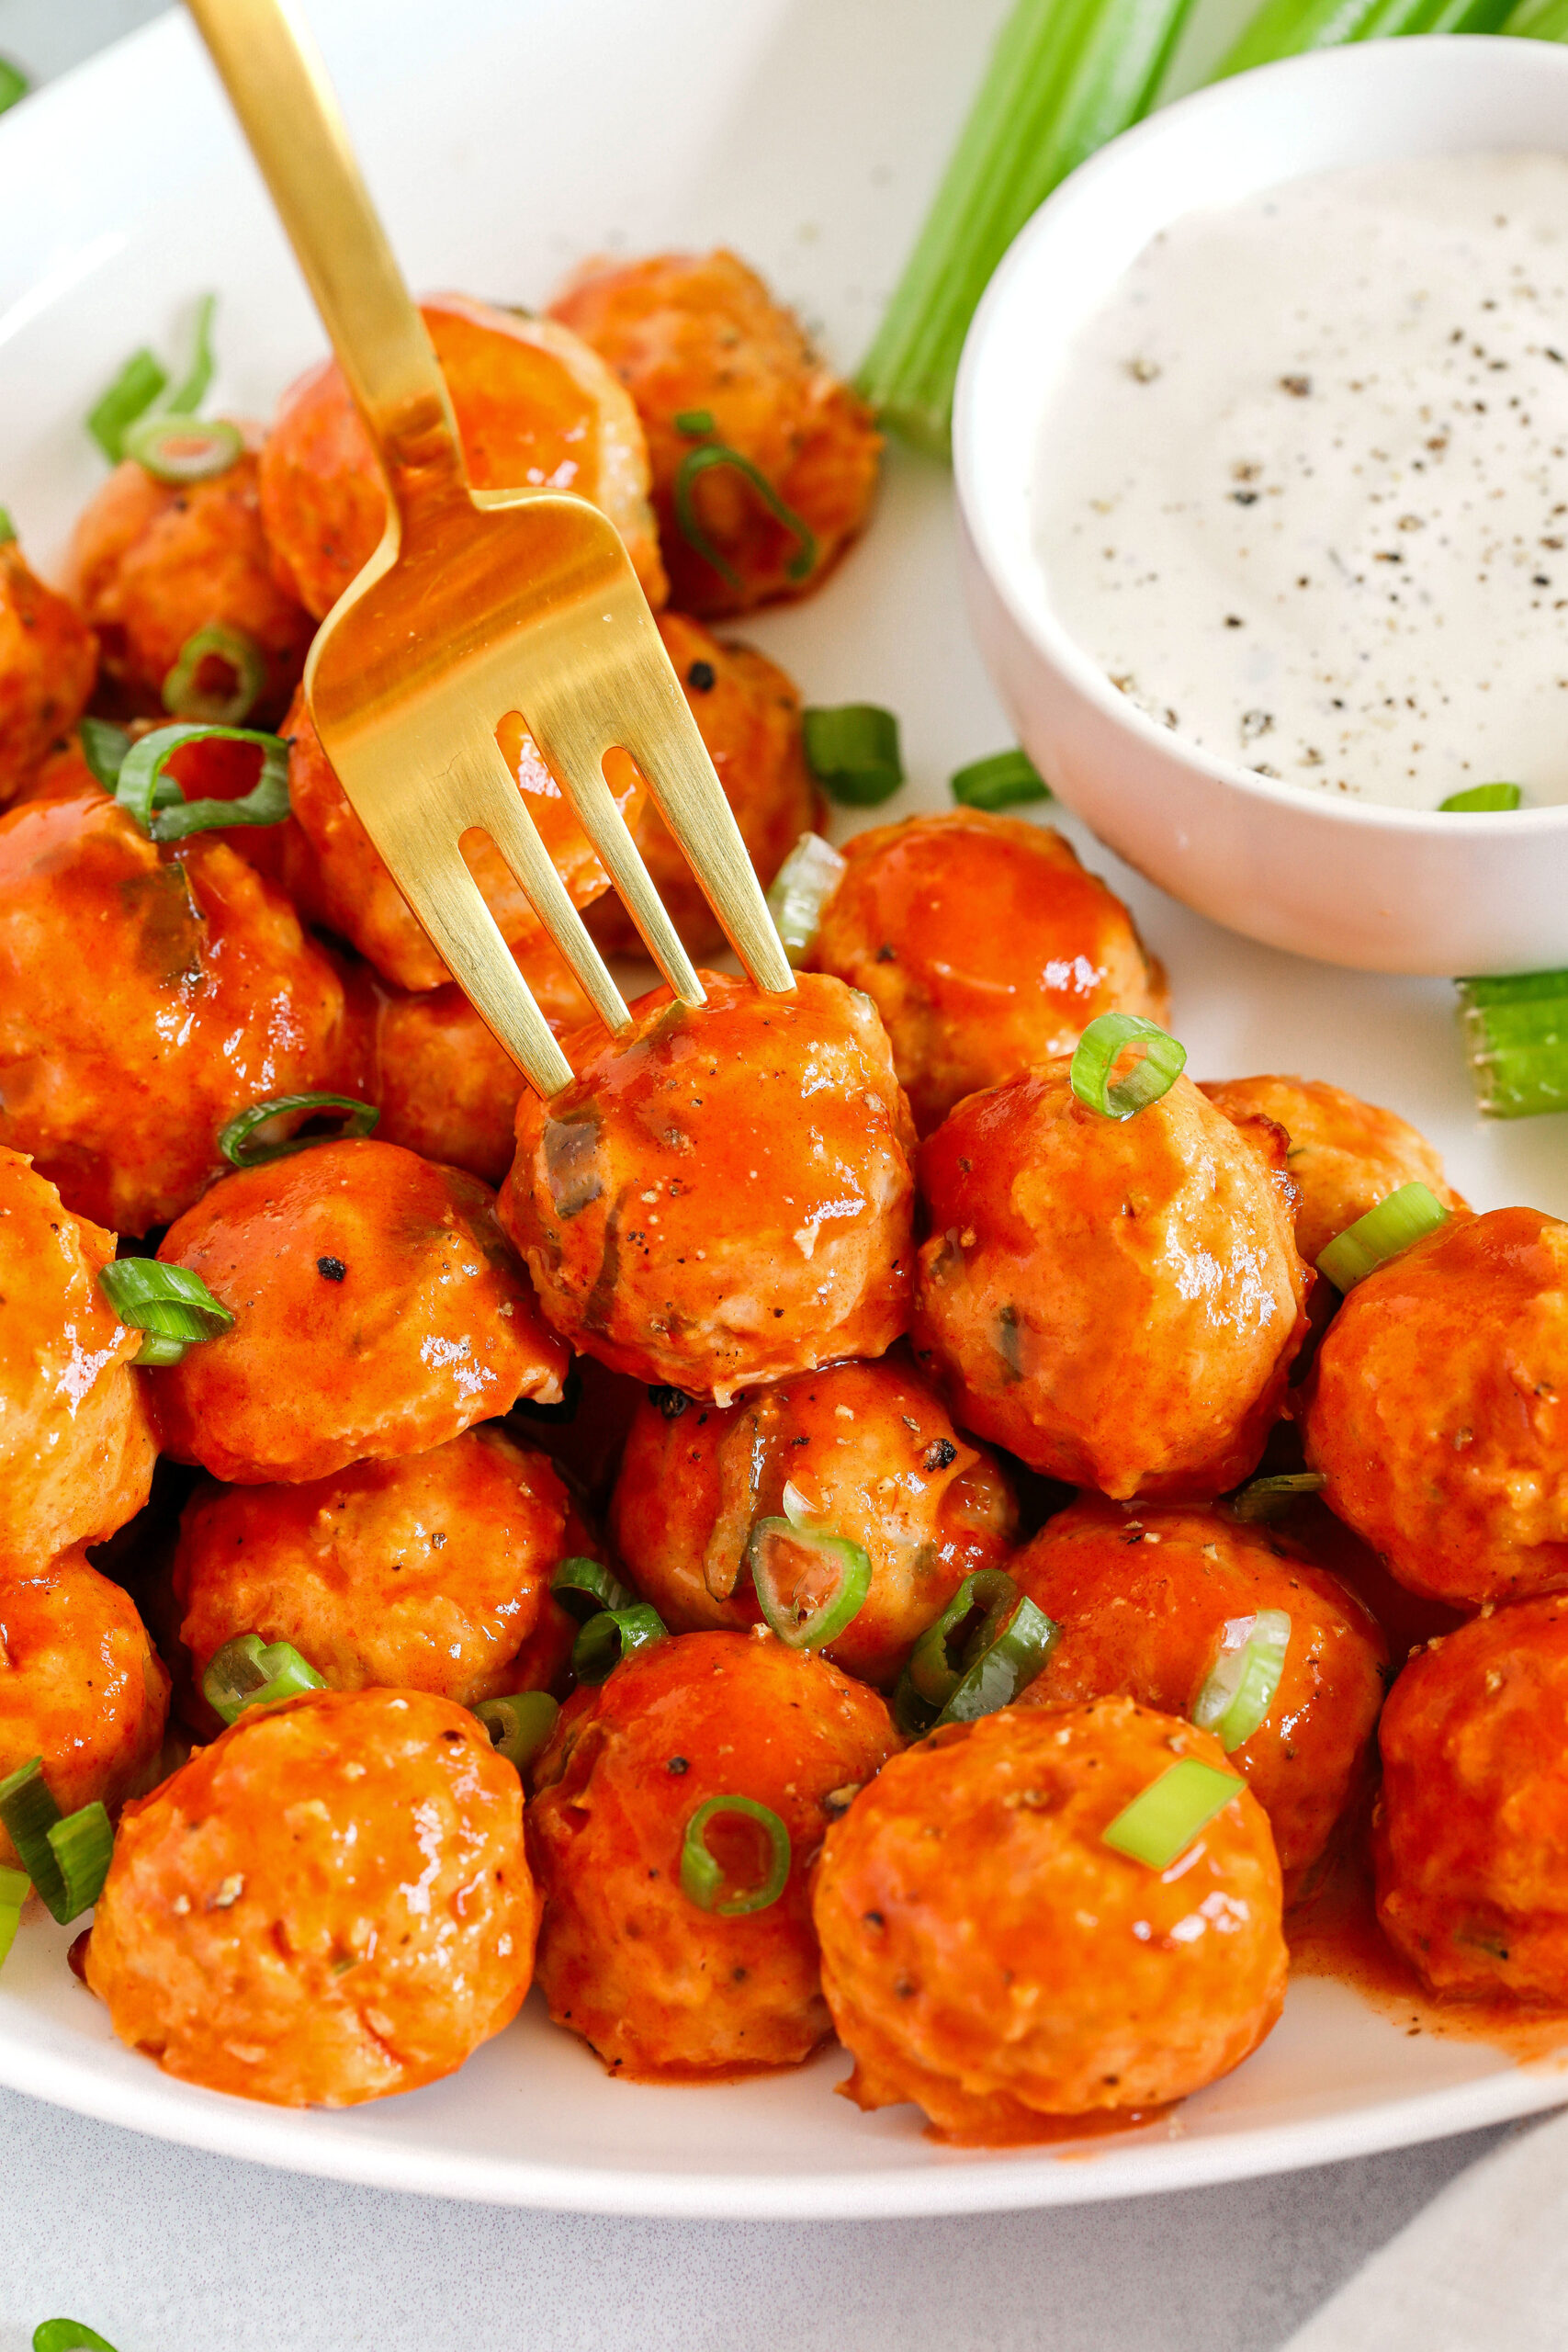 These Buffalo Chicken Meatballs make the perfect party appetizer, game day snack or healthy weeknight dinner!  Easily made with just a few simple ingredients for delicious flavor-packed meatballs served with fresh veggies and your favorite dipping sauce!